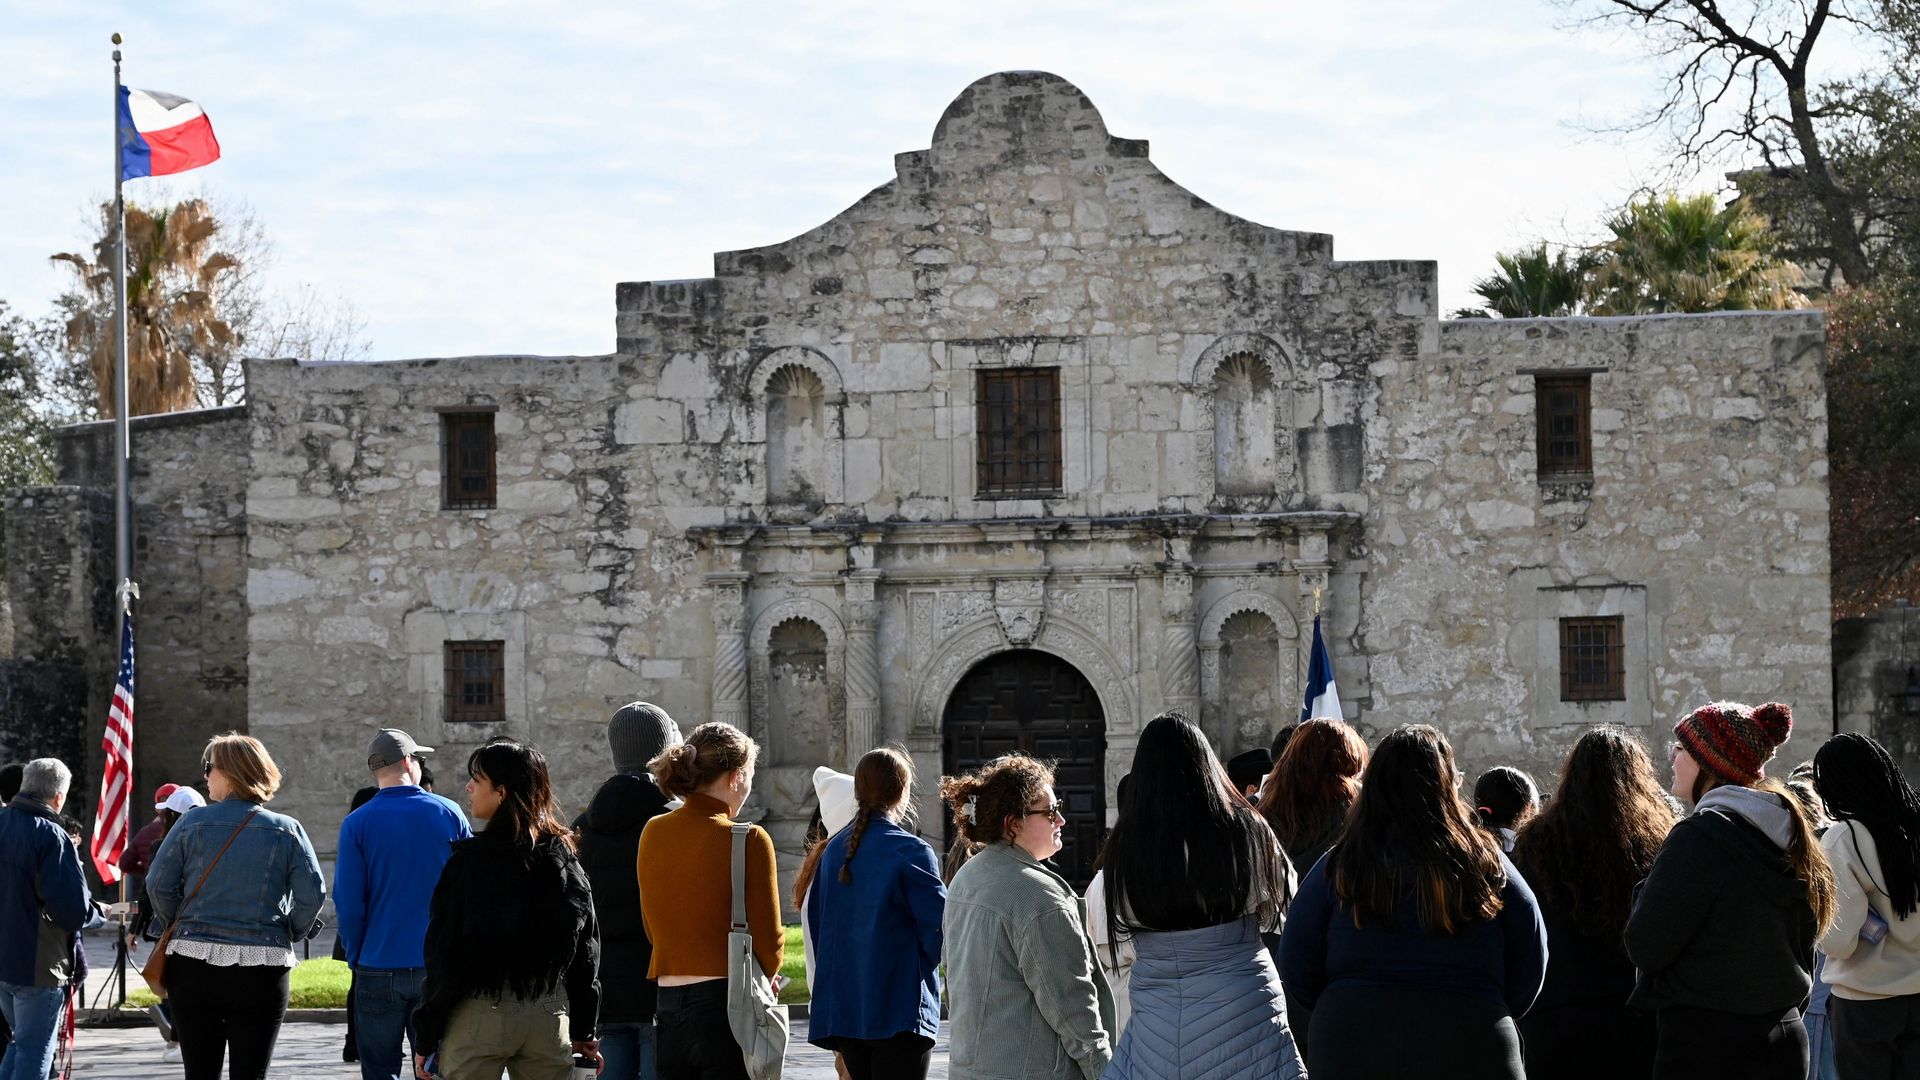 Visitors gather in front of the Alamo.